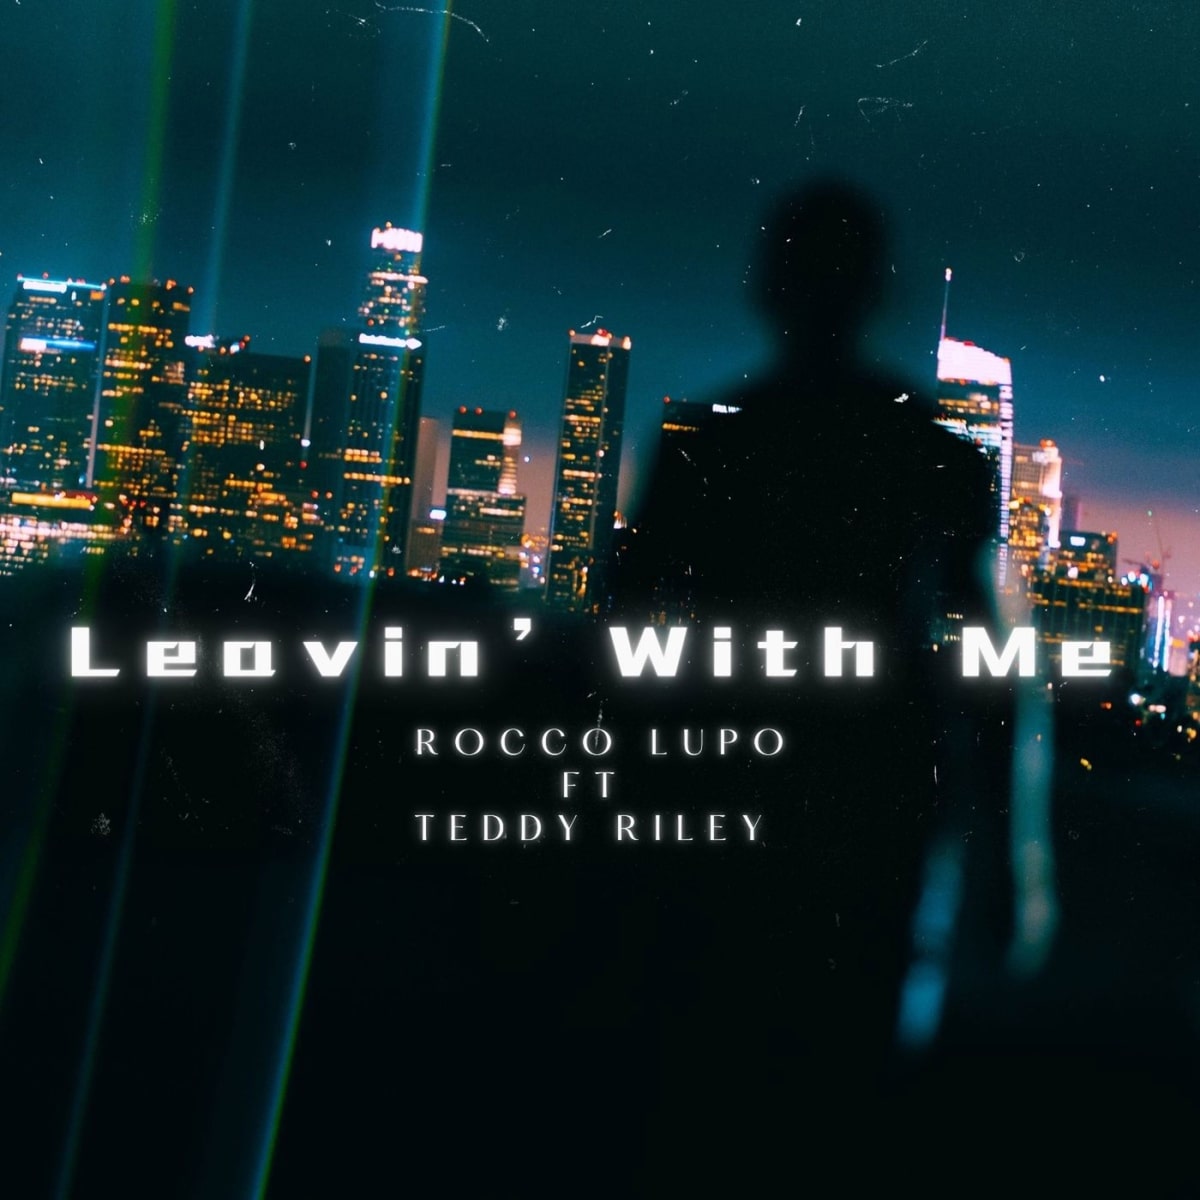 Rocco Lupo’s Highly Anticipated New Single "Leavin’ With Me" Featuring Grammy Winner Teddy Riley Now Available Worldwide